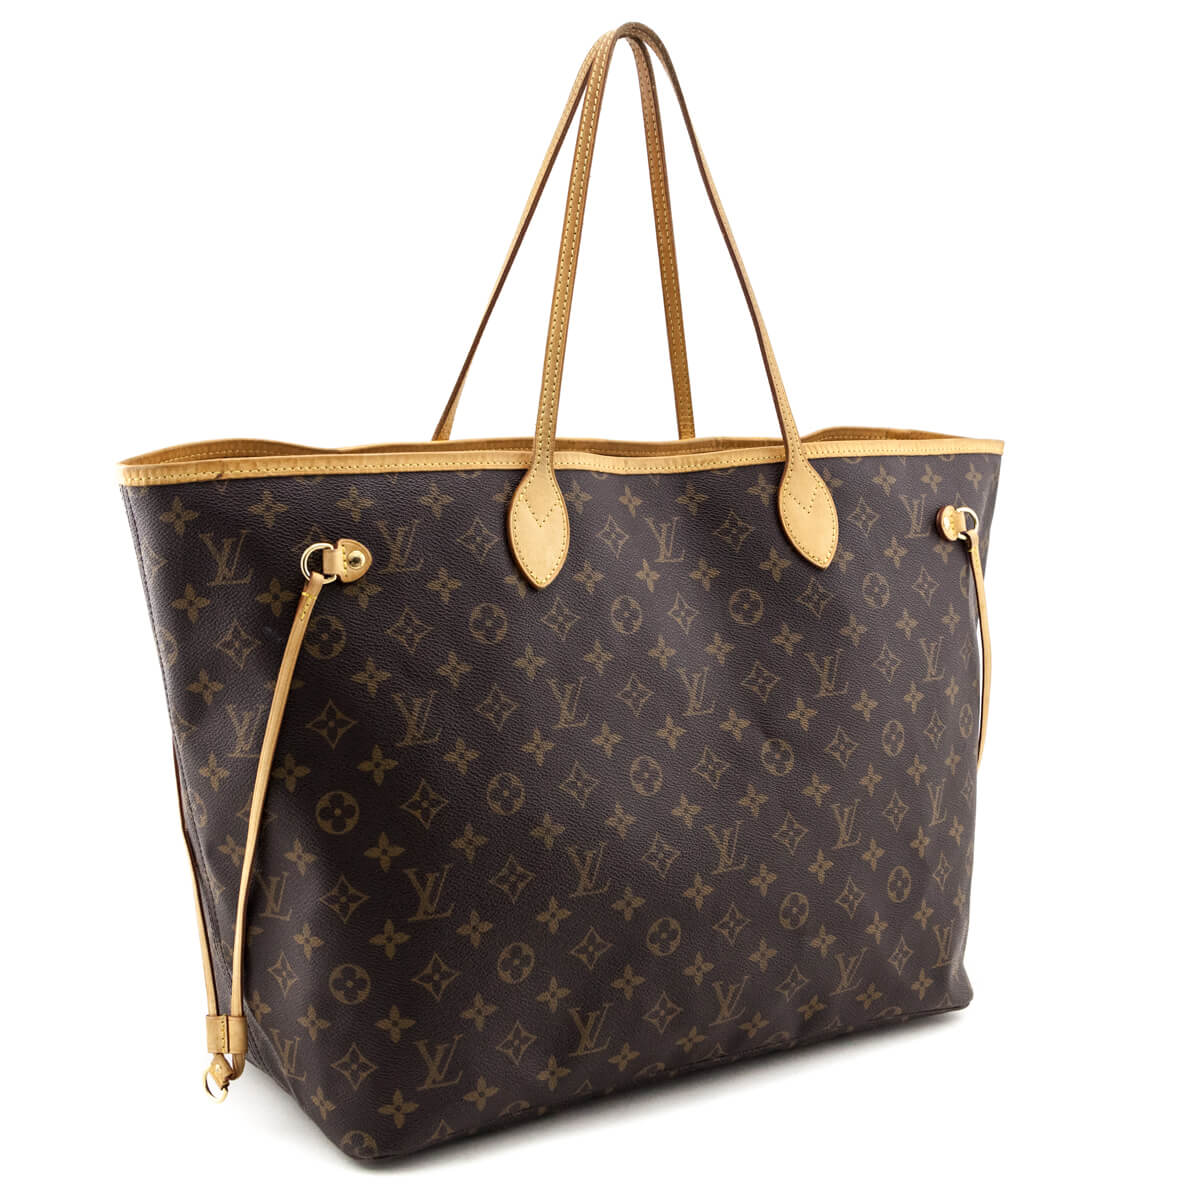 Shop Louis Vuitton Monogram Macassar Ron Wallet Louis Vuitton and save big!  Shop for the best items at a great price and get great service